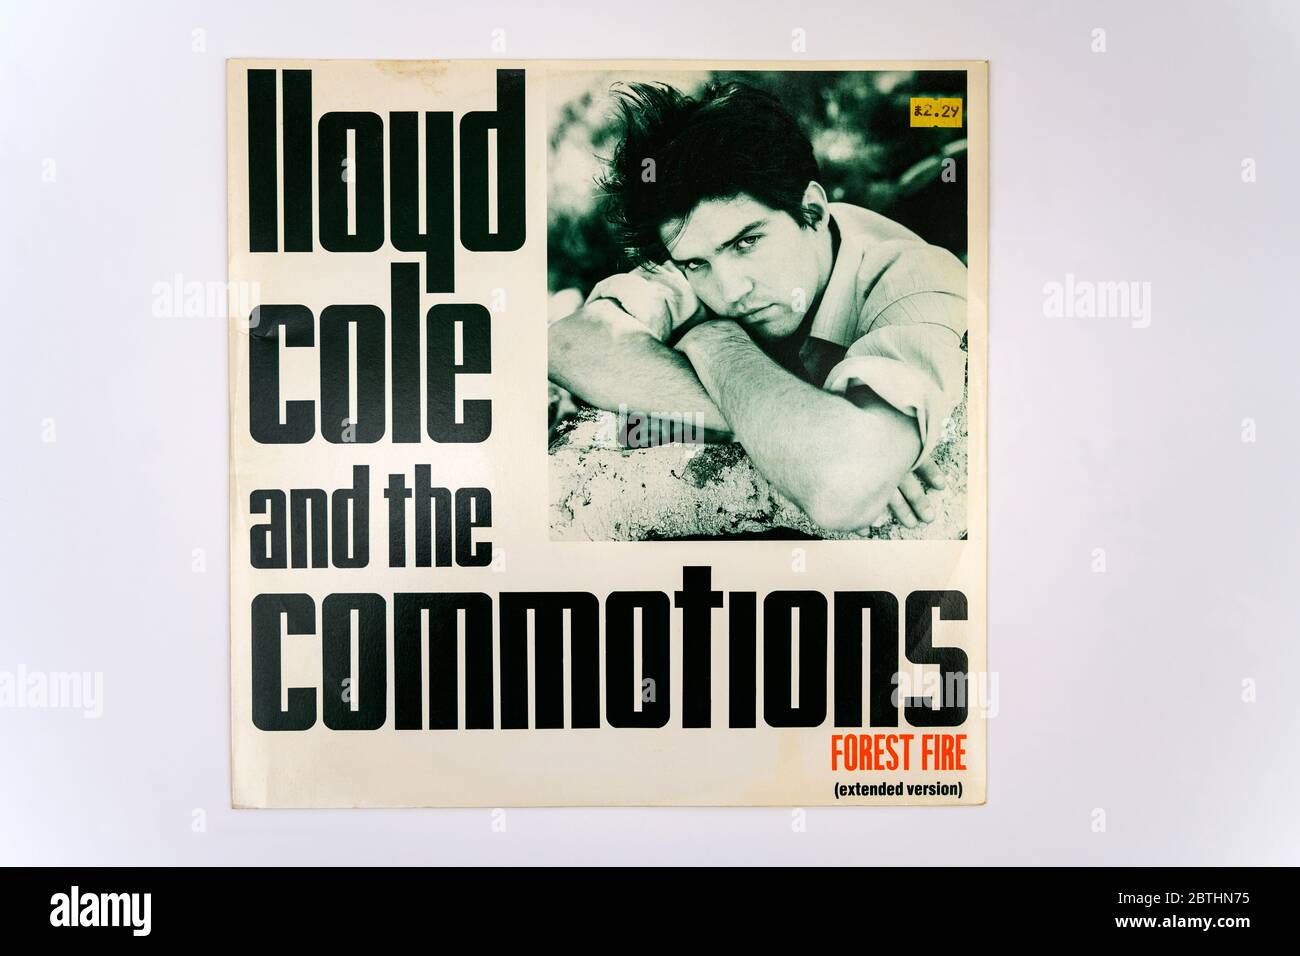 Lloyd Cole and the Commotions Forest Fire 12 inch single Stock Photo